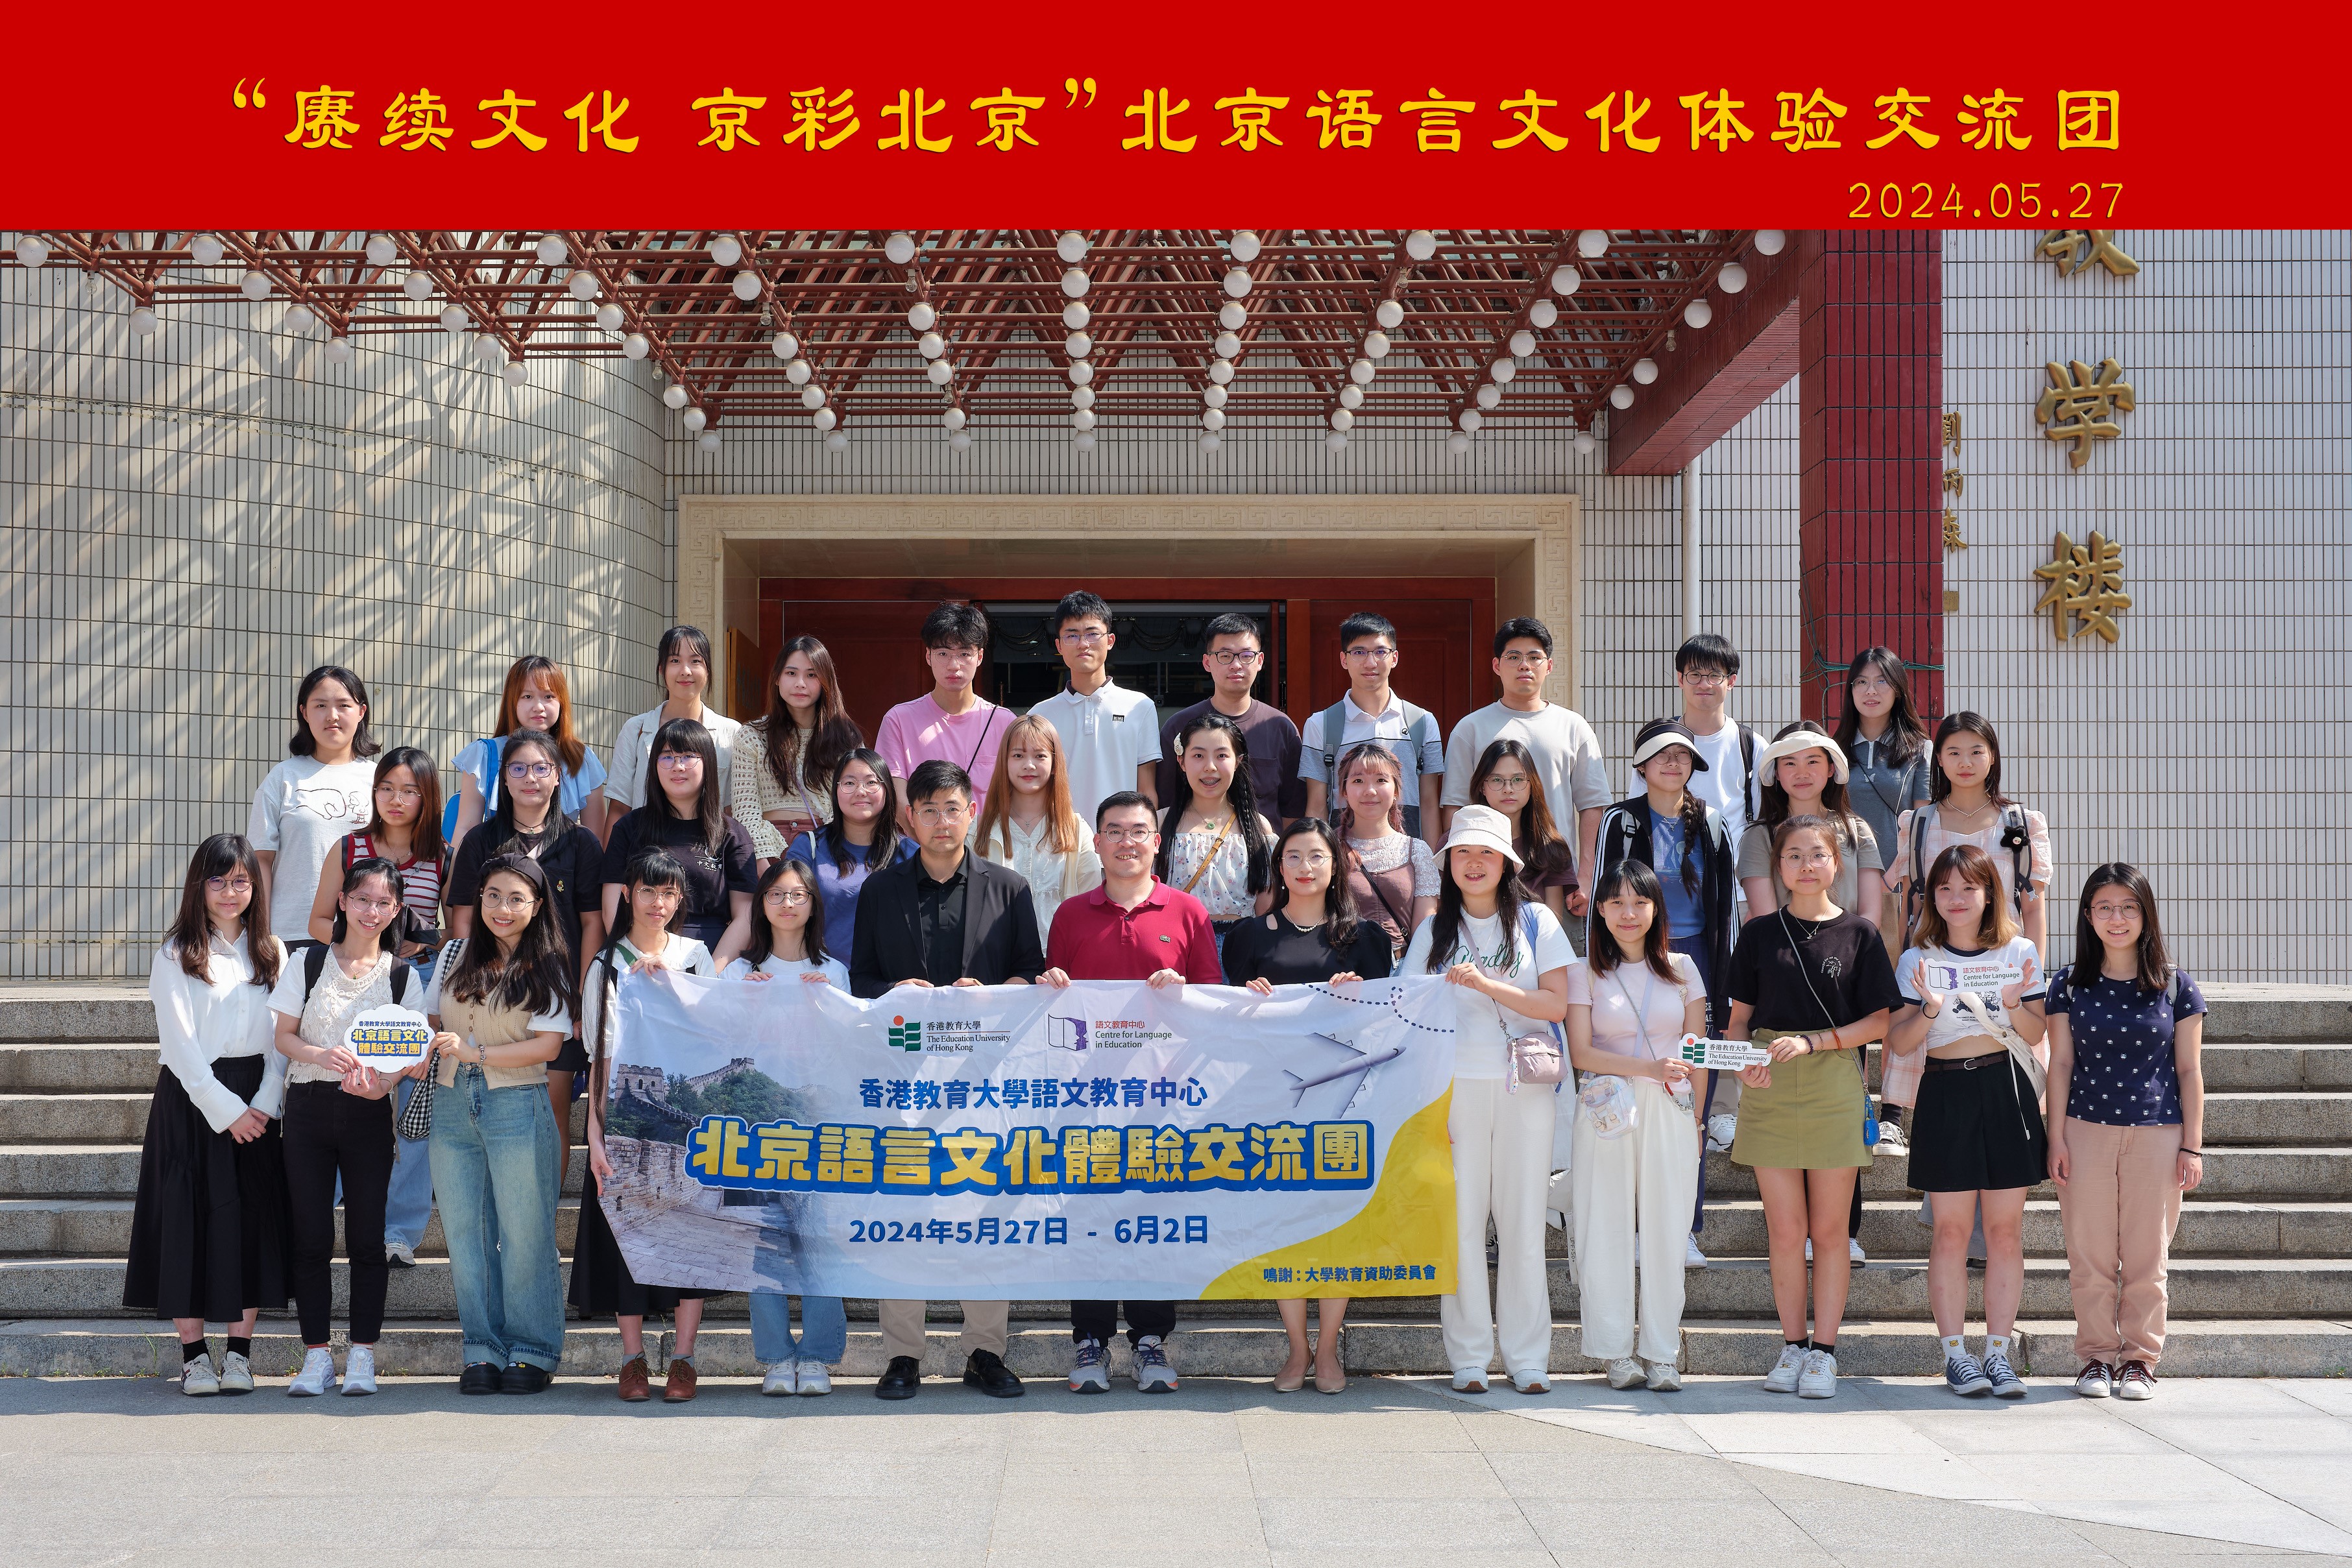 Group photo at the opening of the Beijing Cultural and Language Immersion Study Tour at Beijing Language and Culture University.